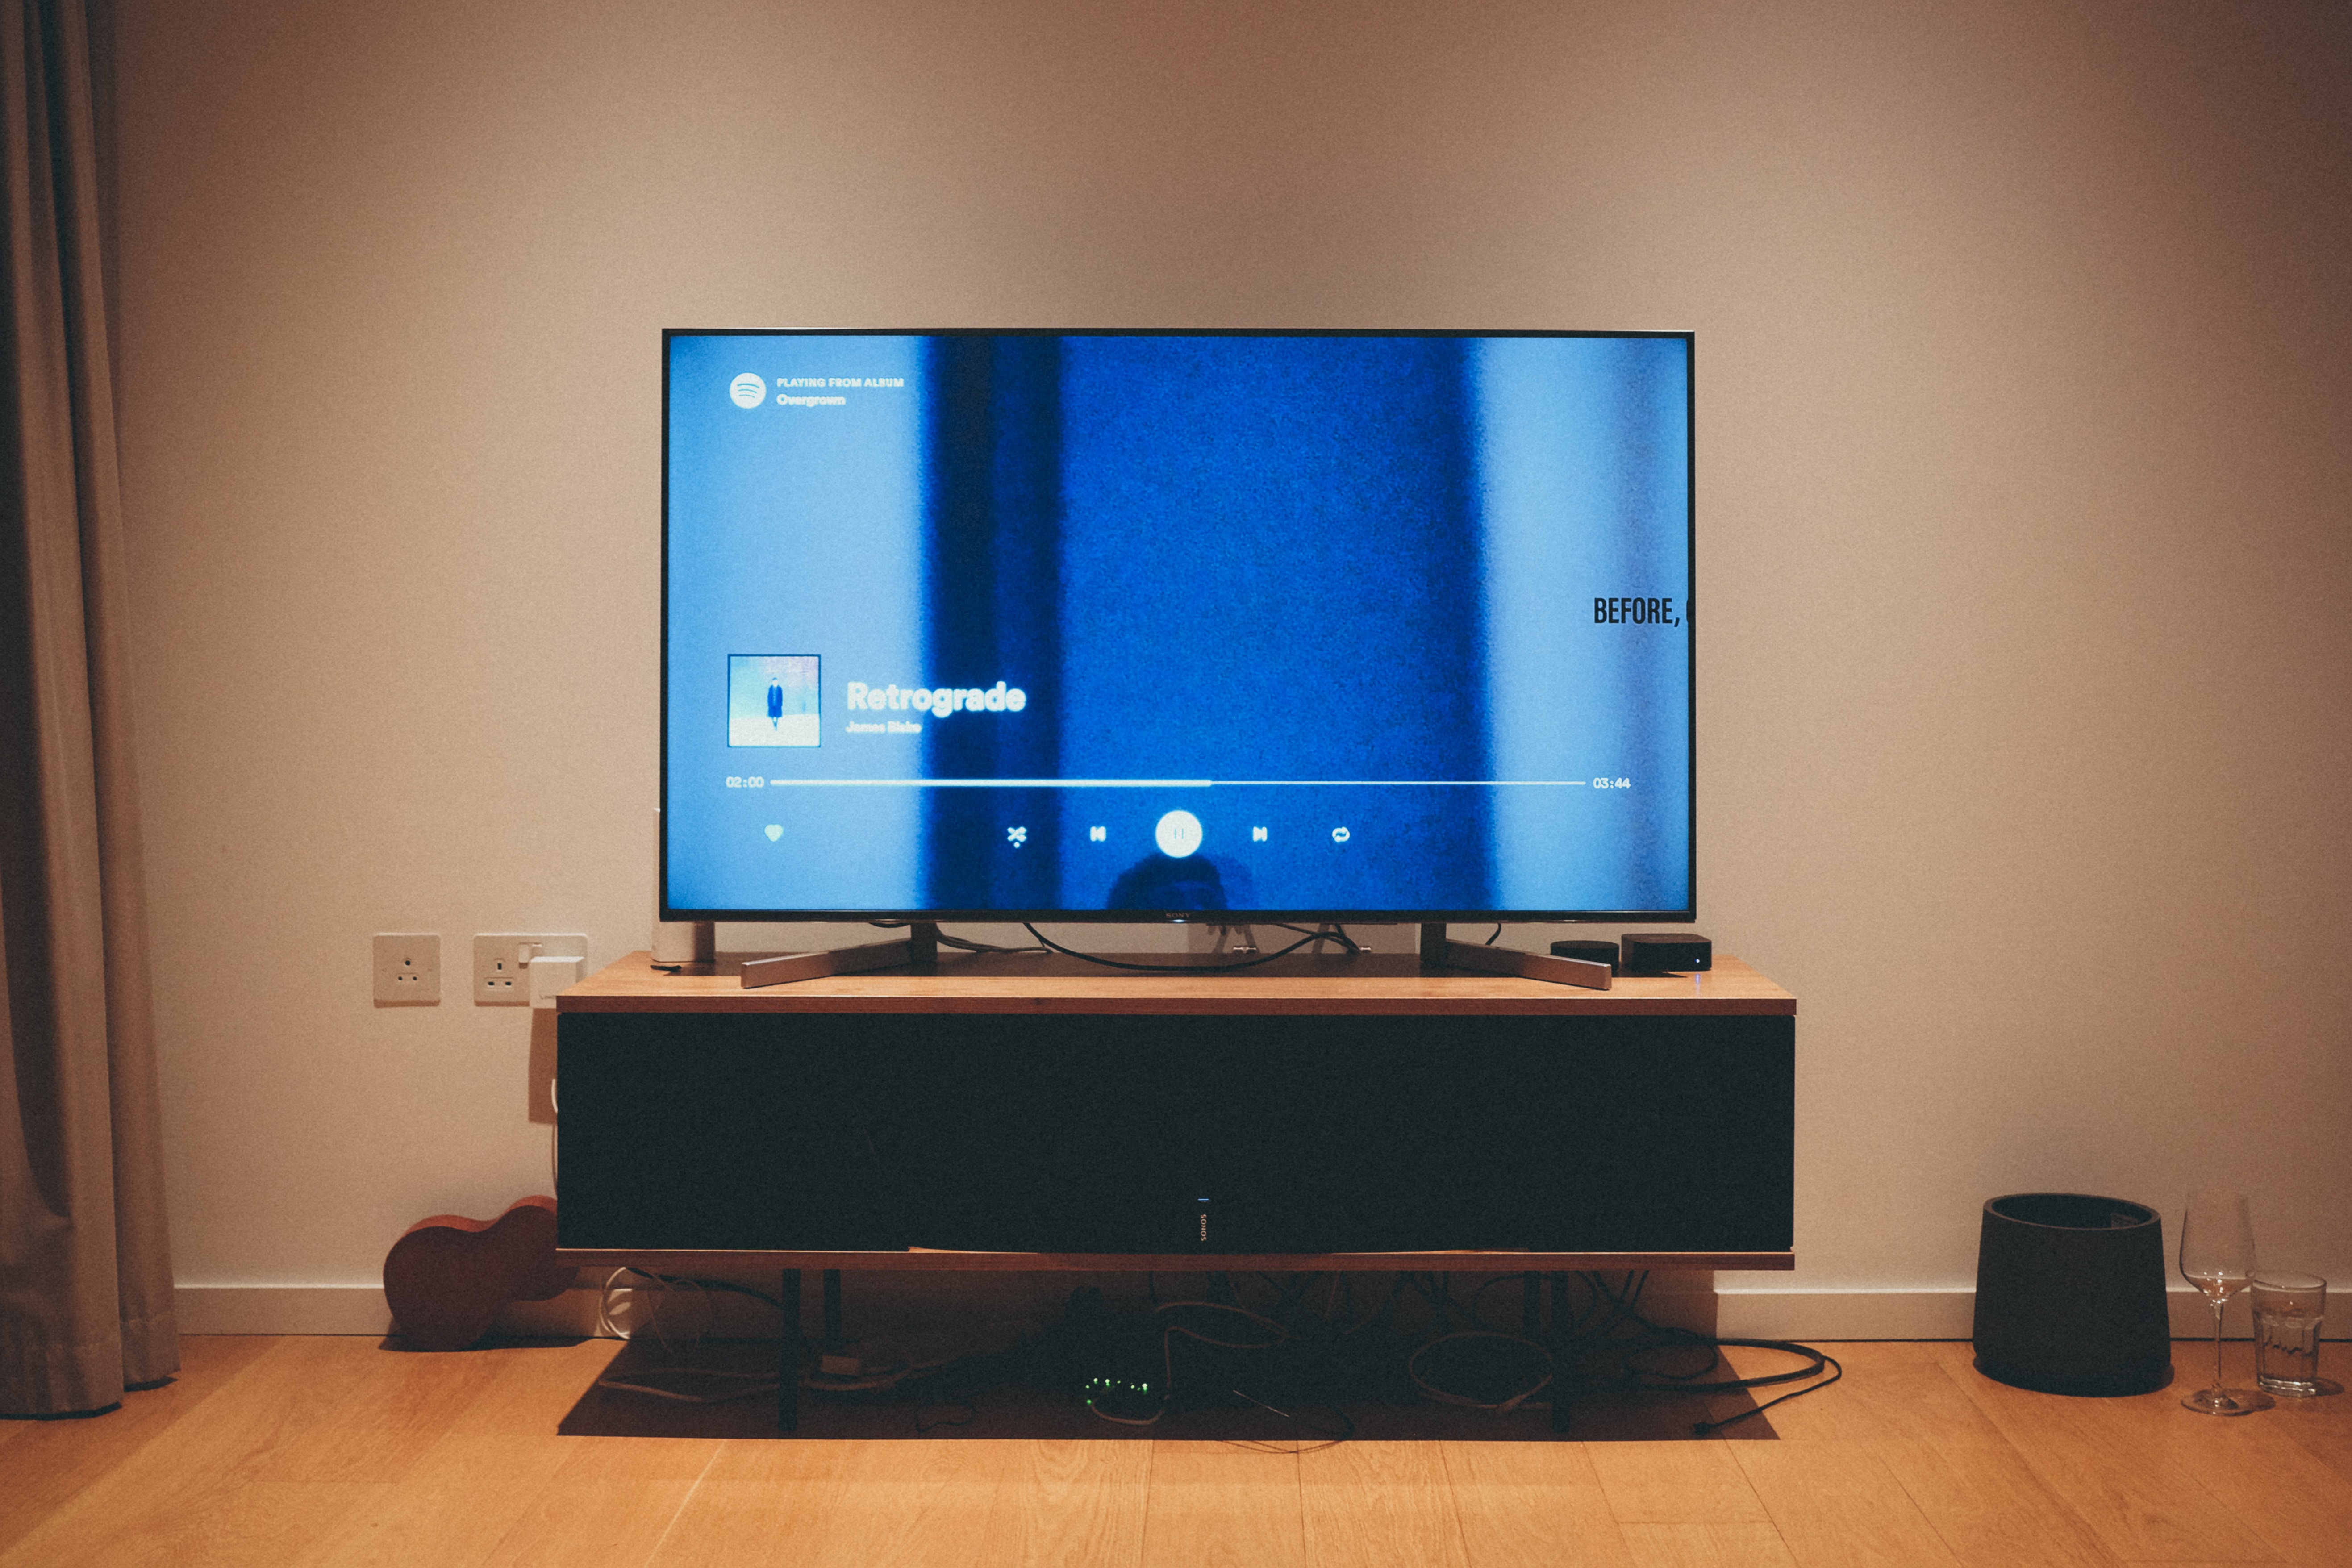 LCD TV Vs LED TV: What You Need To Know